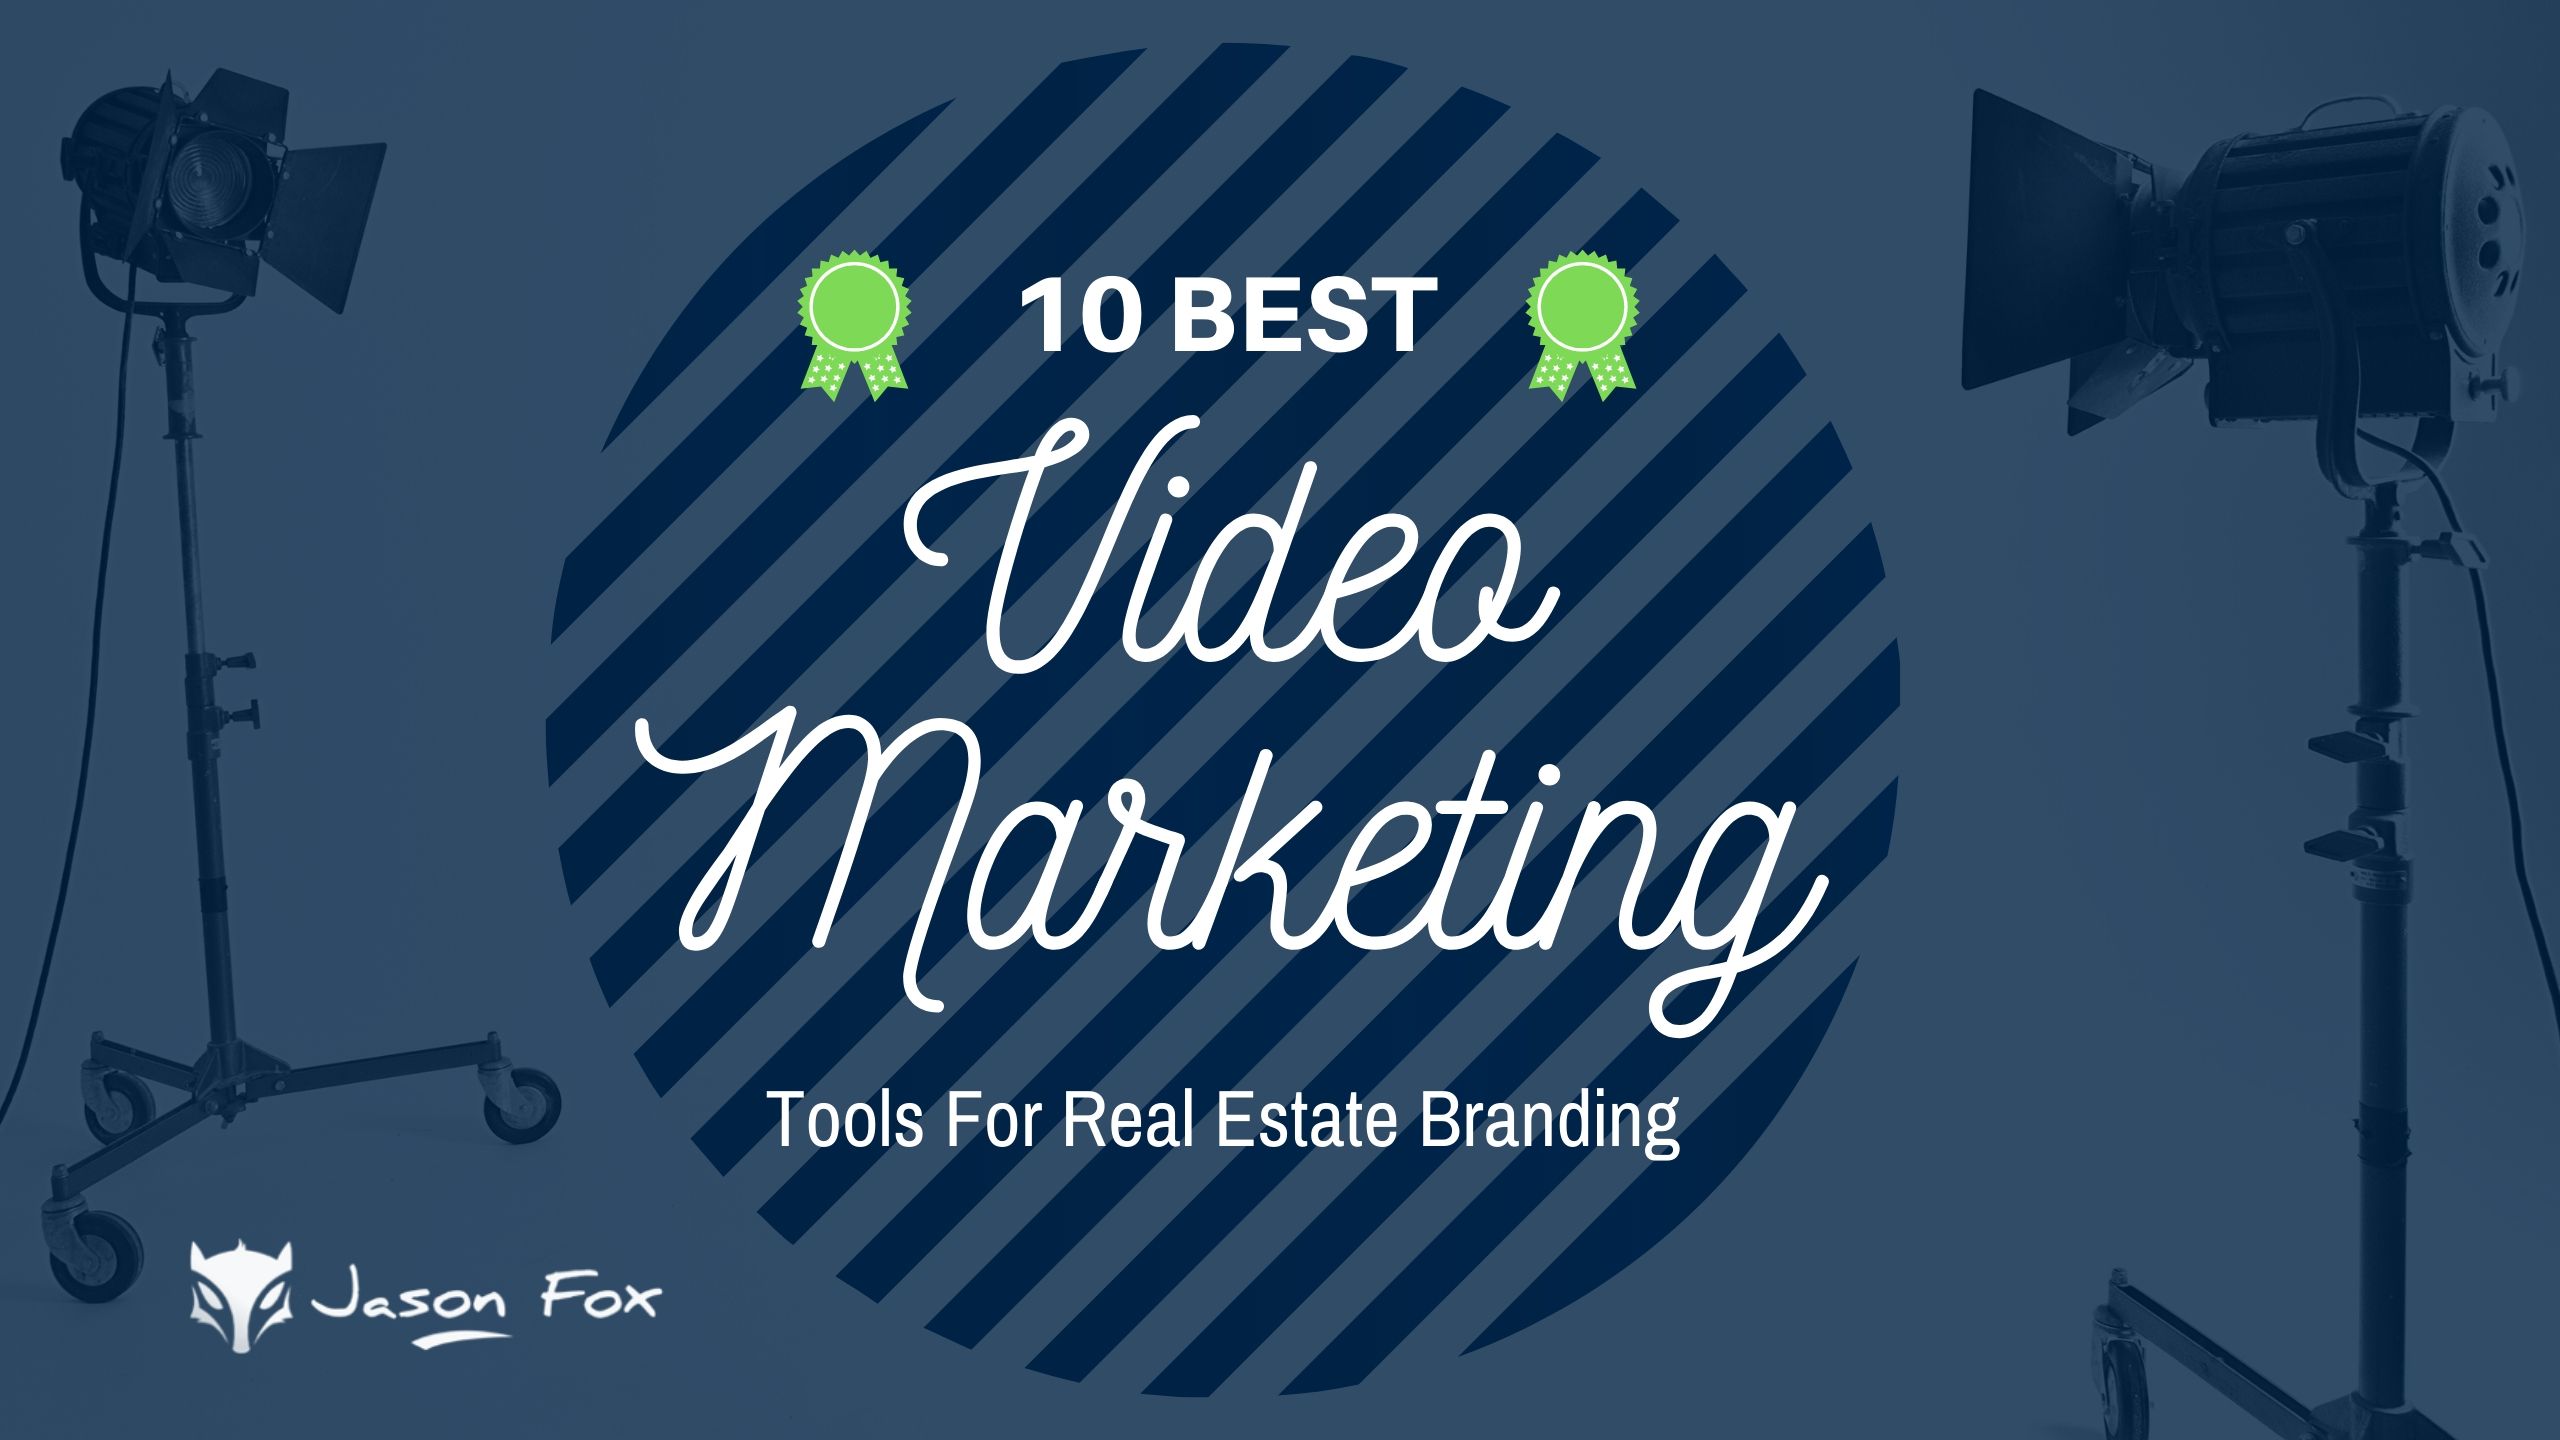 10 best video marketing tools for real estate branding